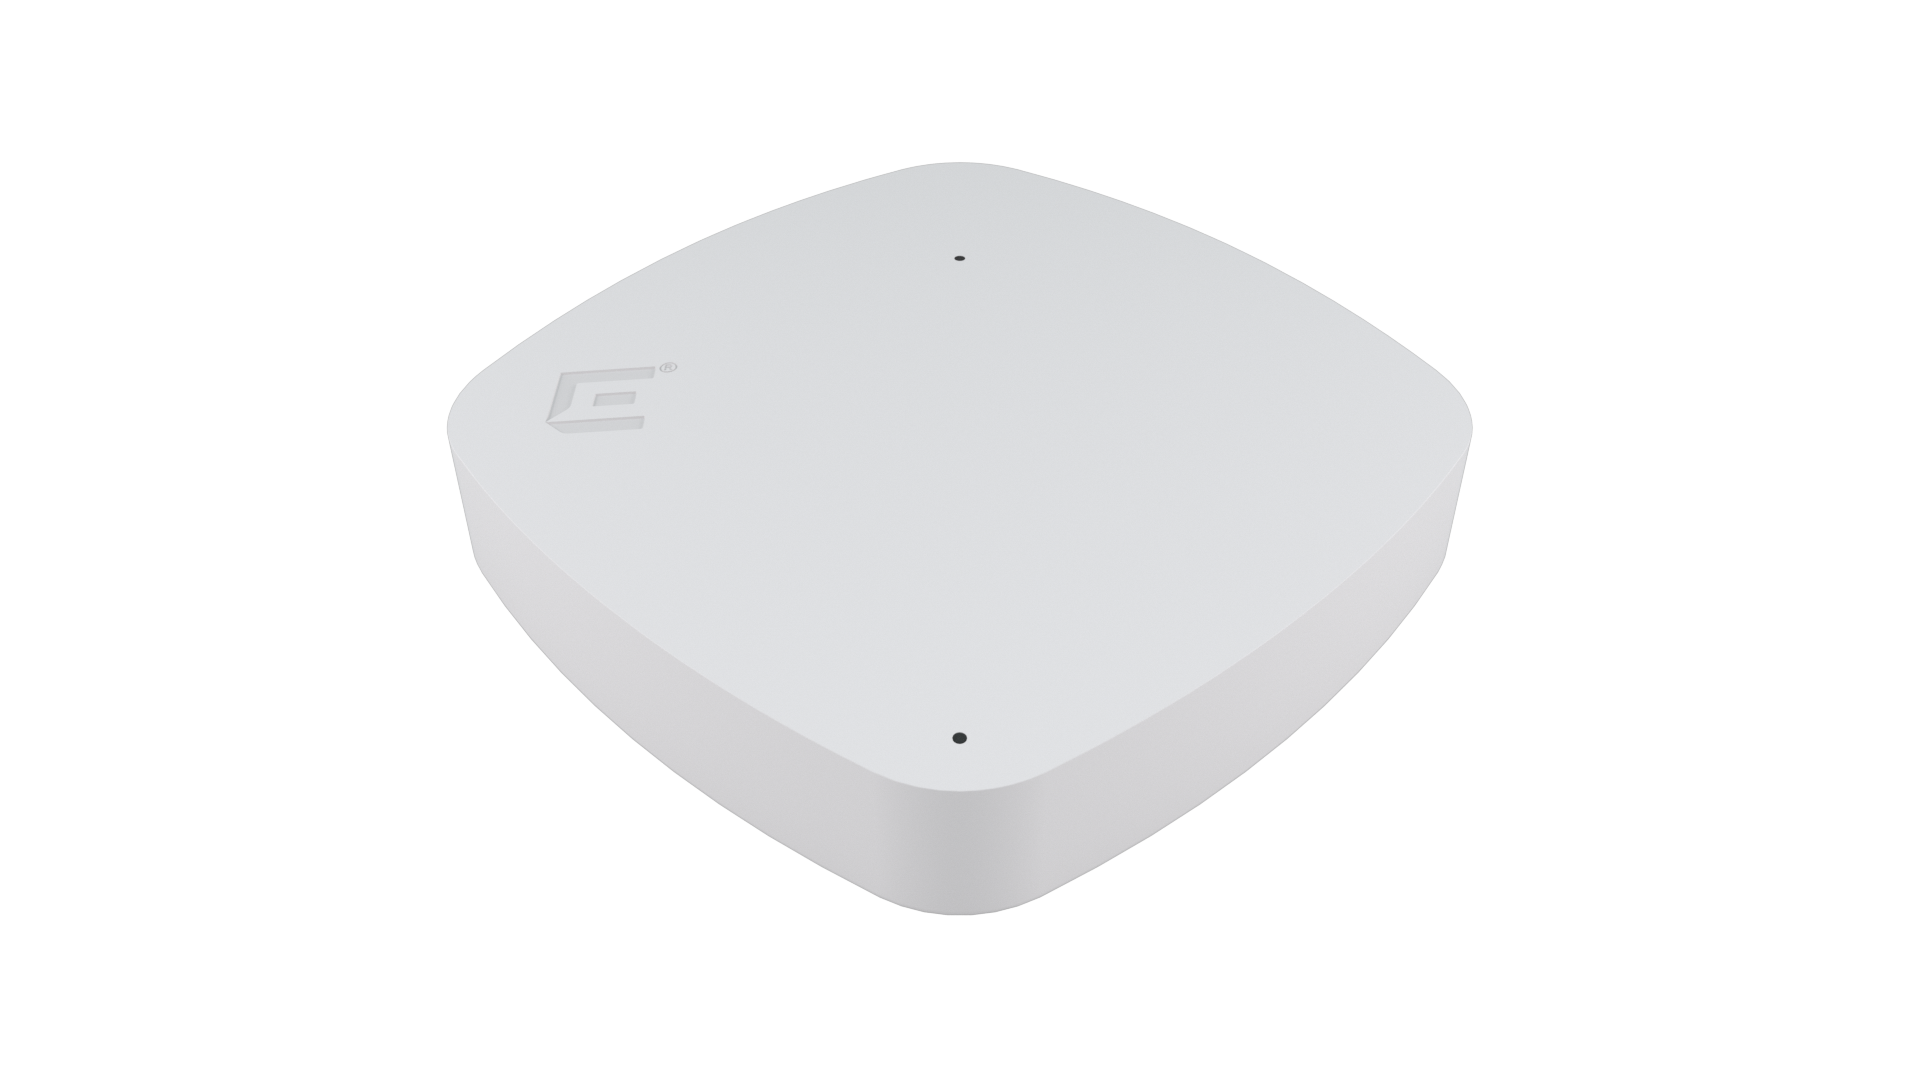 The AP3000 access point with the Extreme logo on the left side of the device